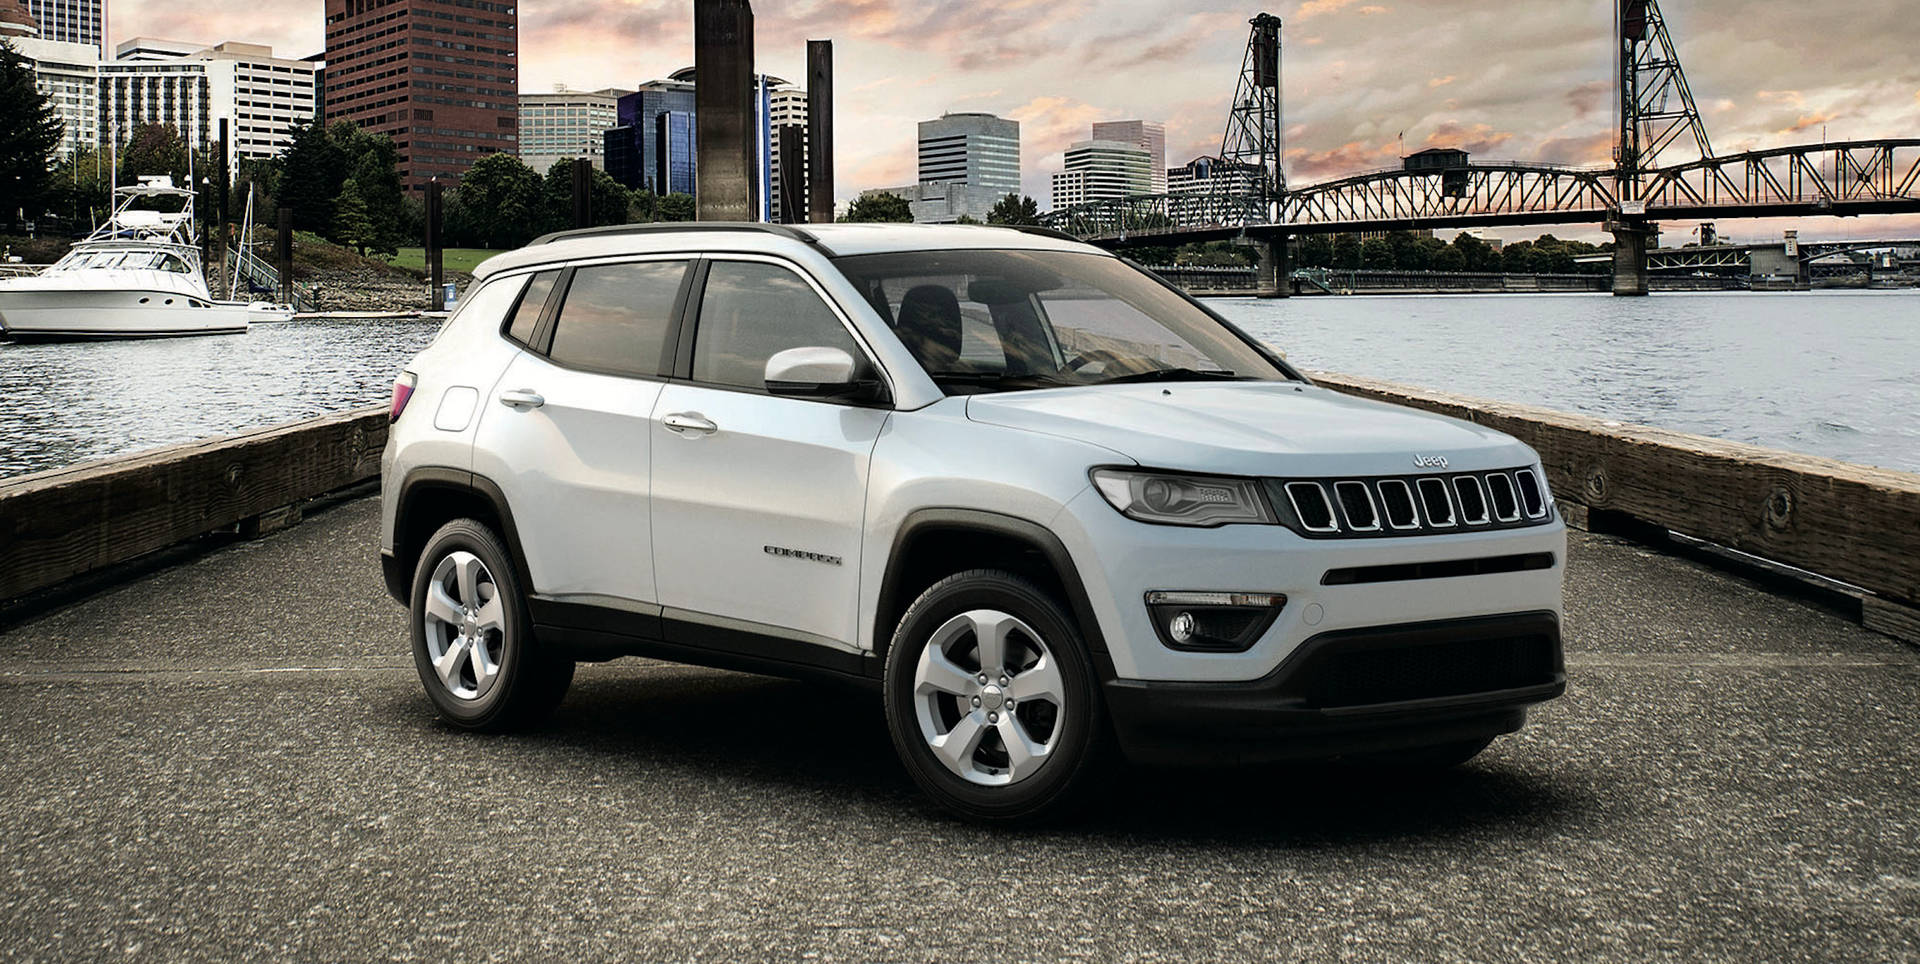 Luxurious Elegance - The White Jeep Compass Wallpaper